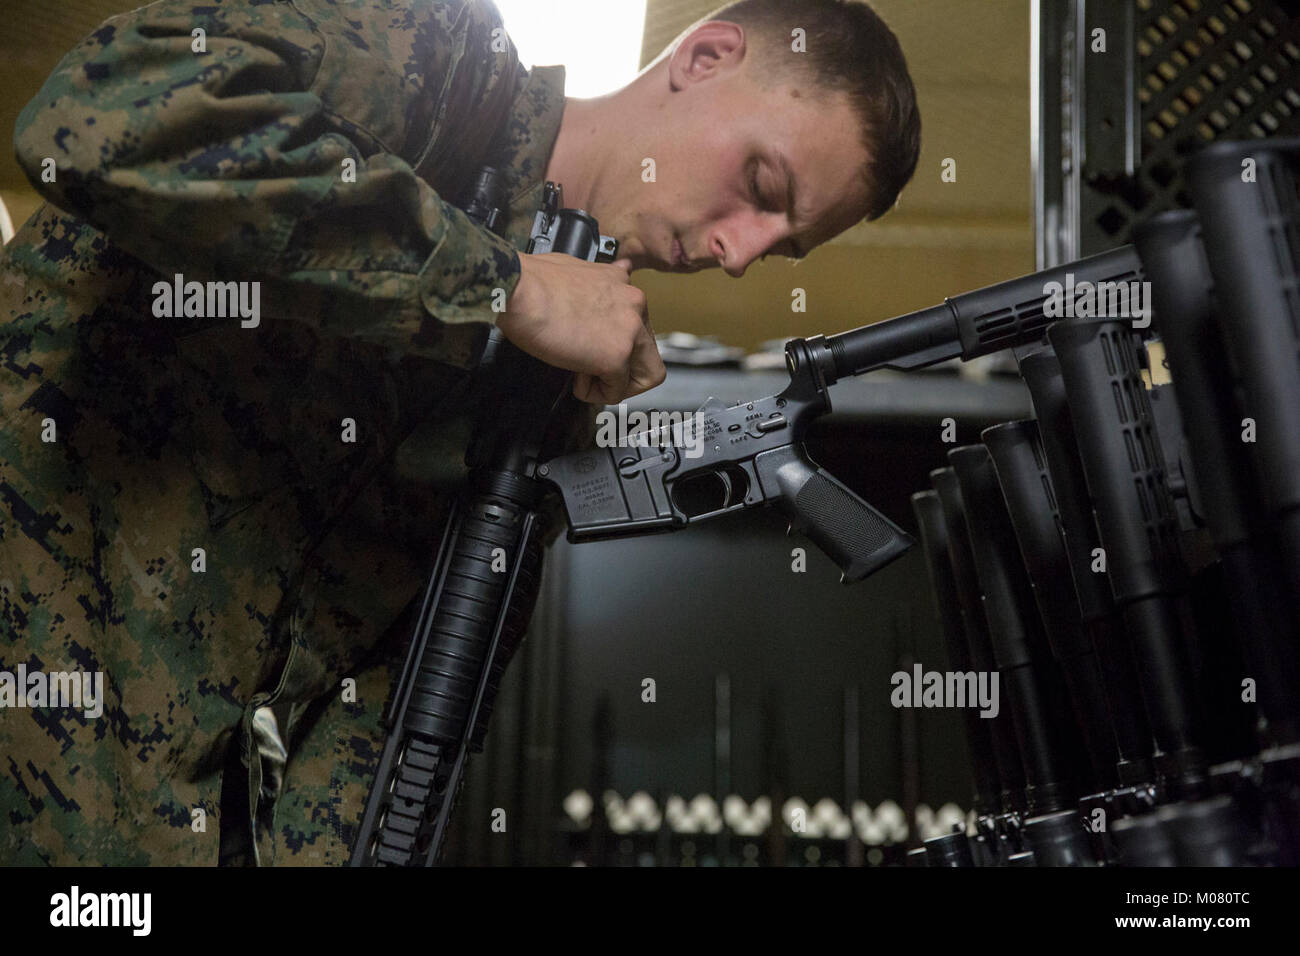 LCpl. Jacob Cooper, Victorville, Calif., a 2111 Armorer with Headquarters and Support Bn., Marine Corps Base Camp Pendleton, examines the condition of the lower receiver of an M16A4 rifle during a pre-fire inspection Jan 8, 2018. Prior to an upcoming event or range, limited technical inspections and pre-fire inspections are conducted, ensuring that each weapon is fully operational and cleared for use. (U.S. Marine Corps Stock Photo